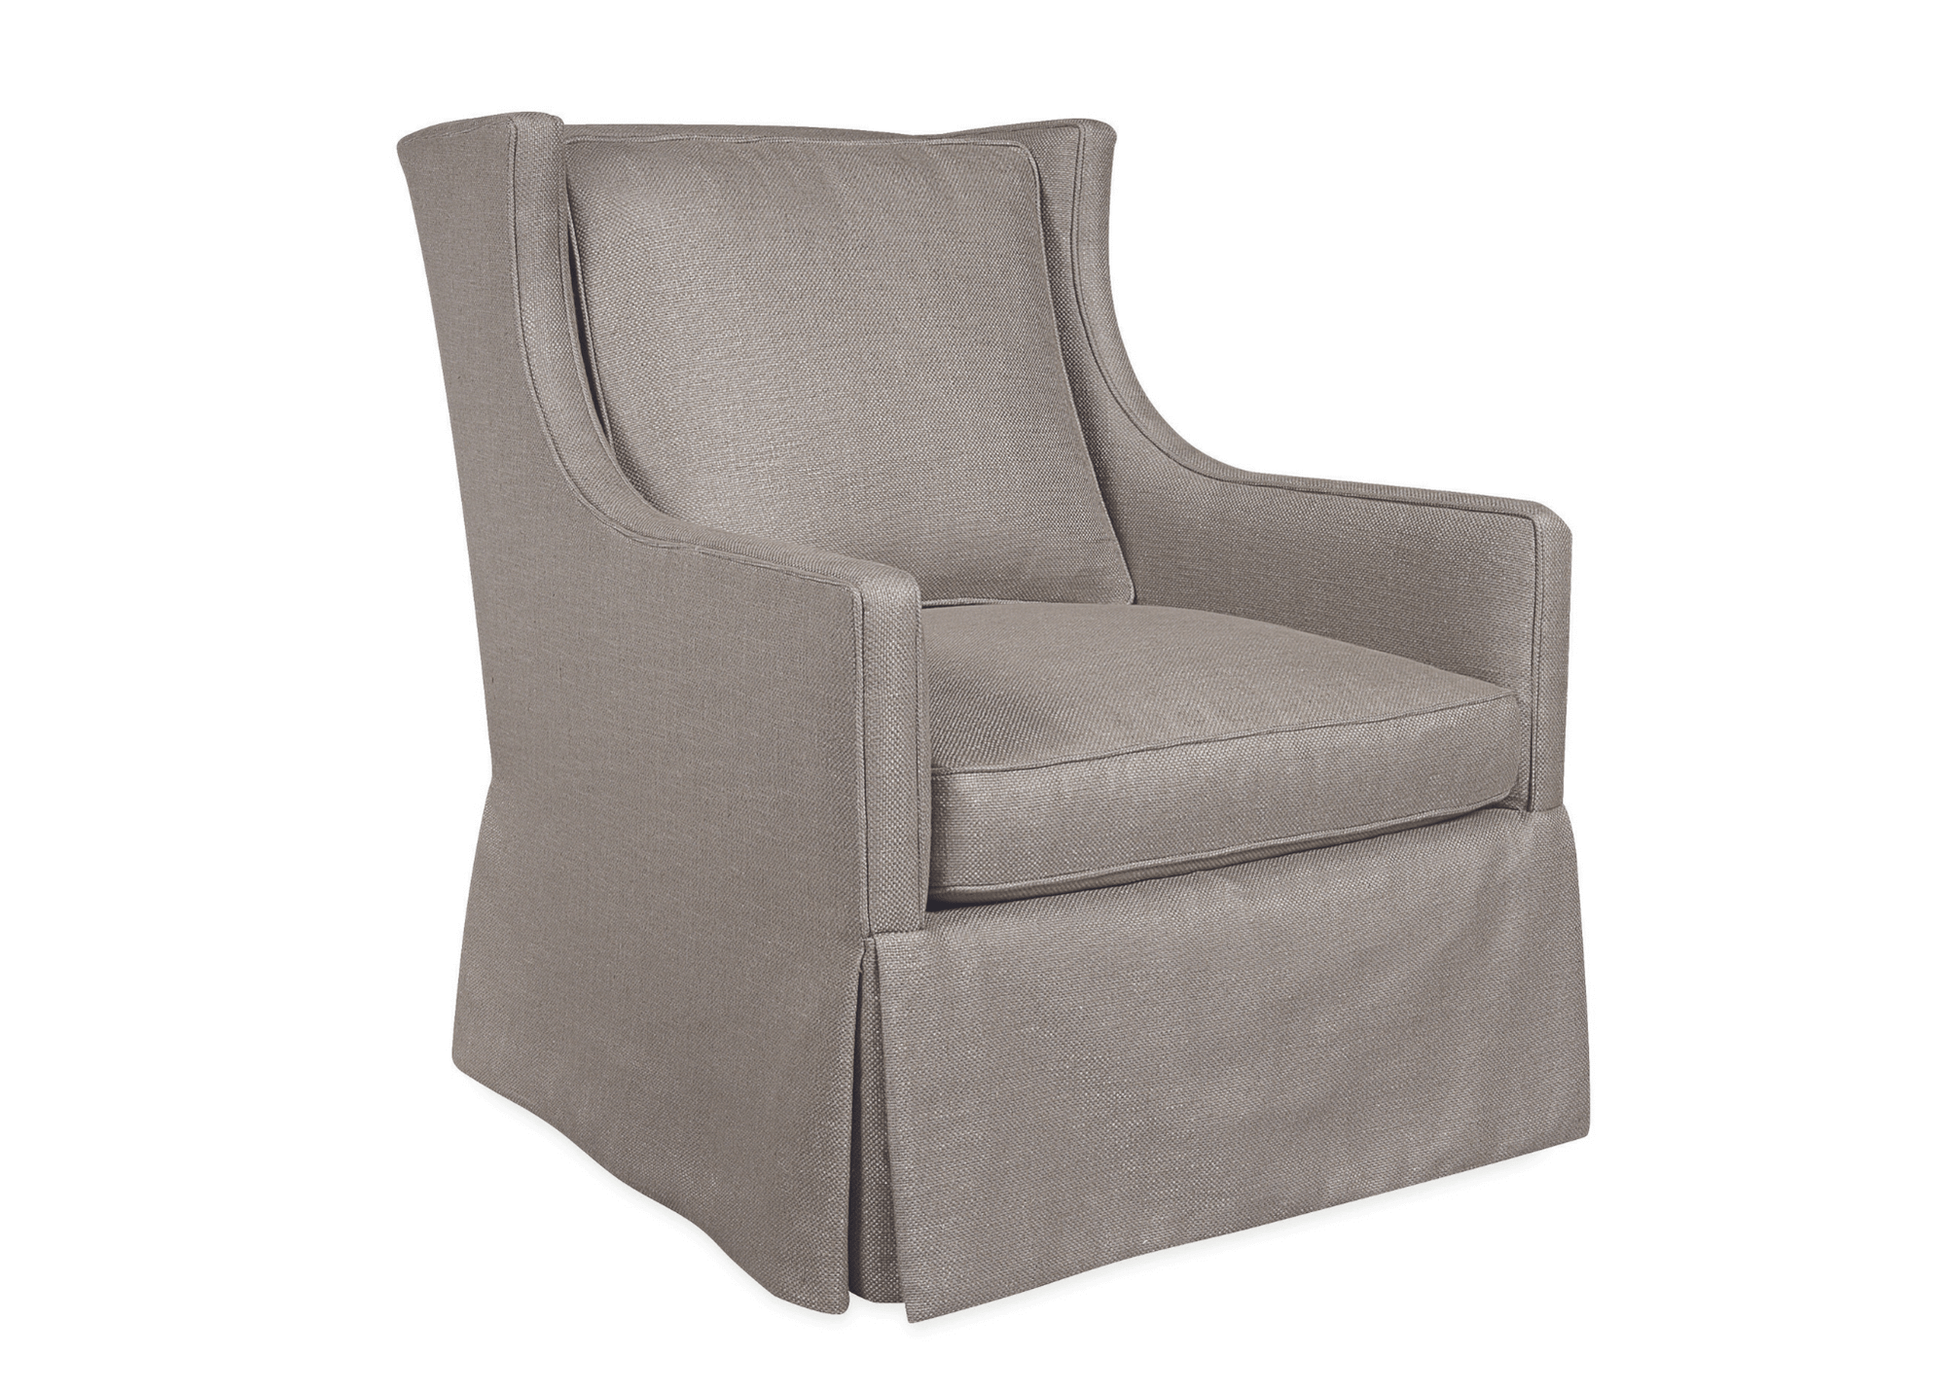 Lee Industries 1211-01SW Chair in a gray fabric with english arm. 